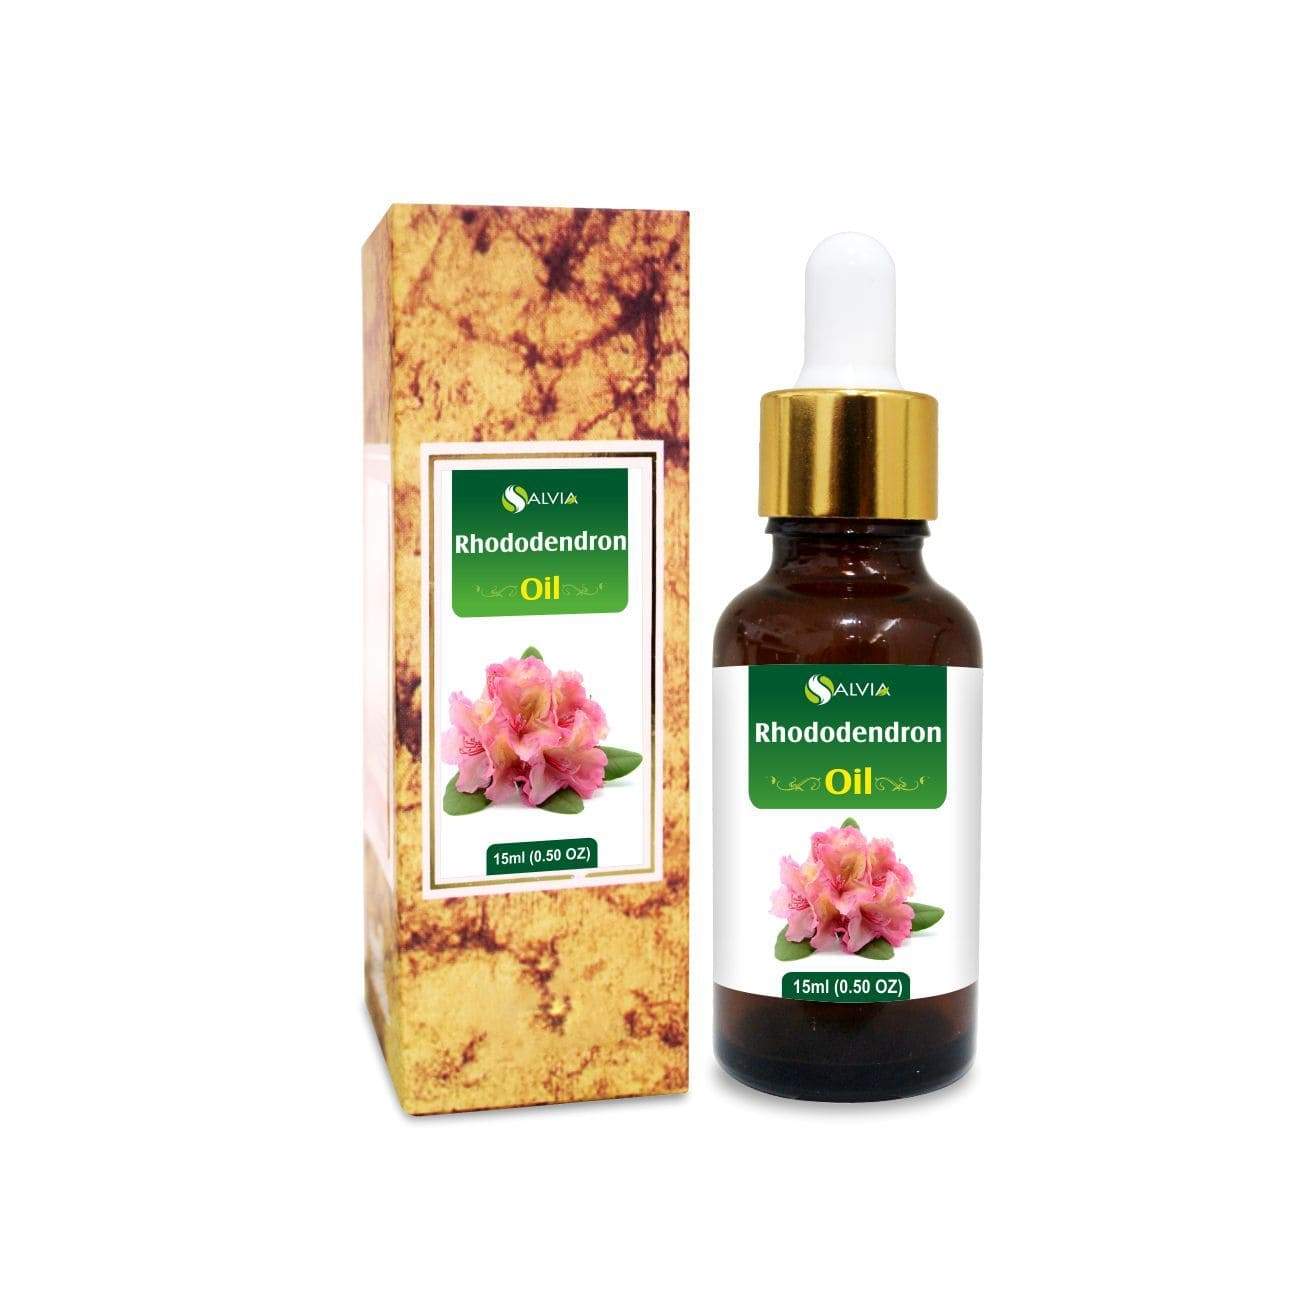   rhododendron essential oil substitute